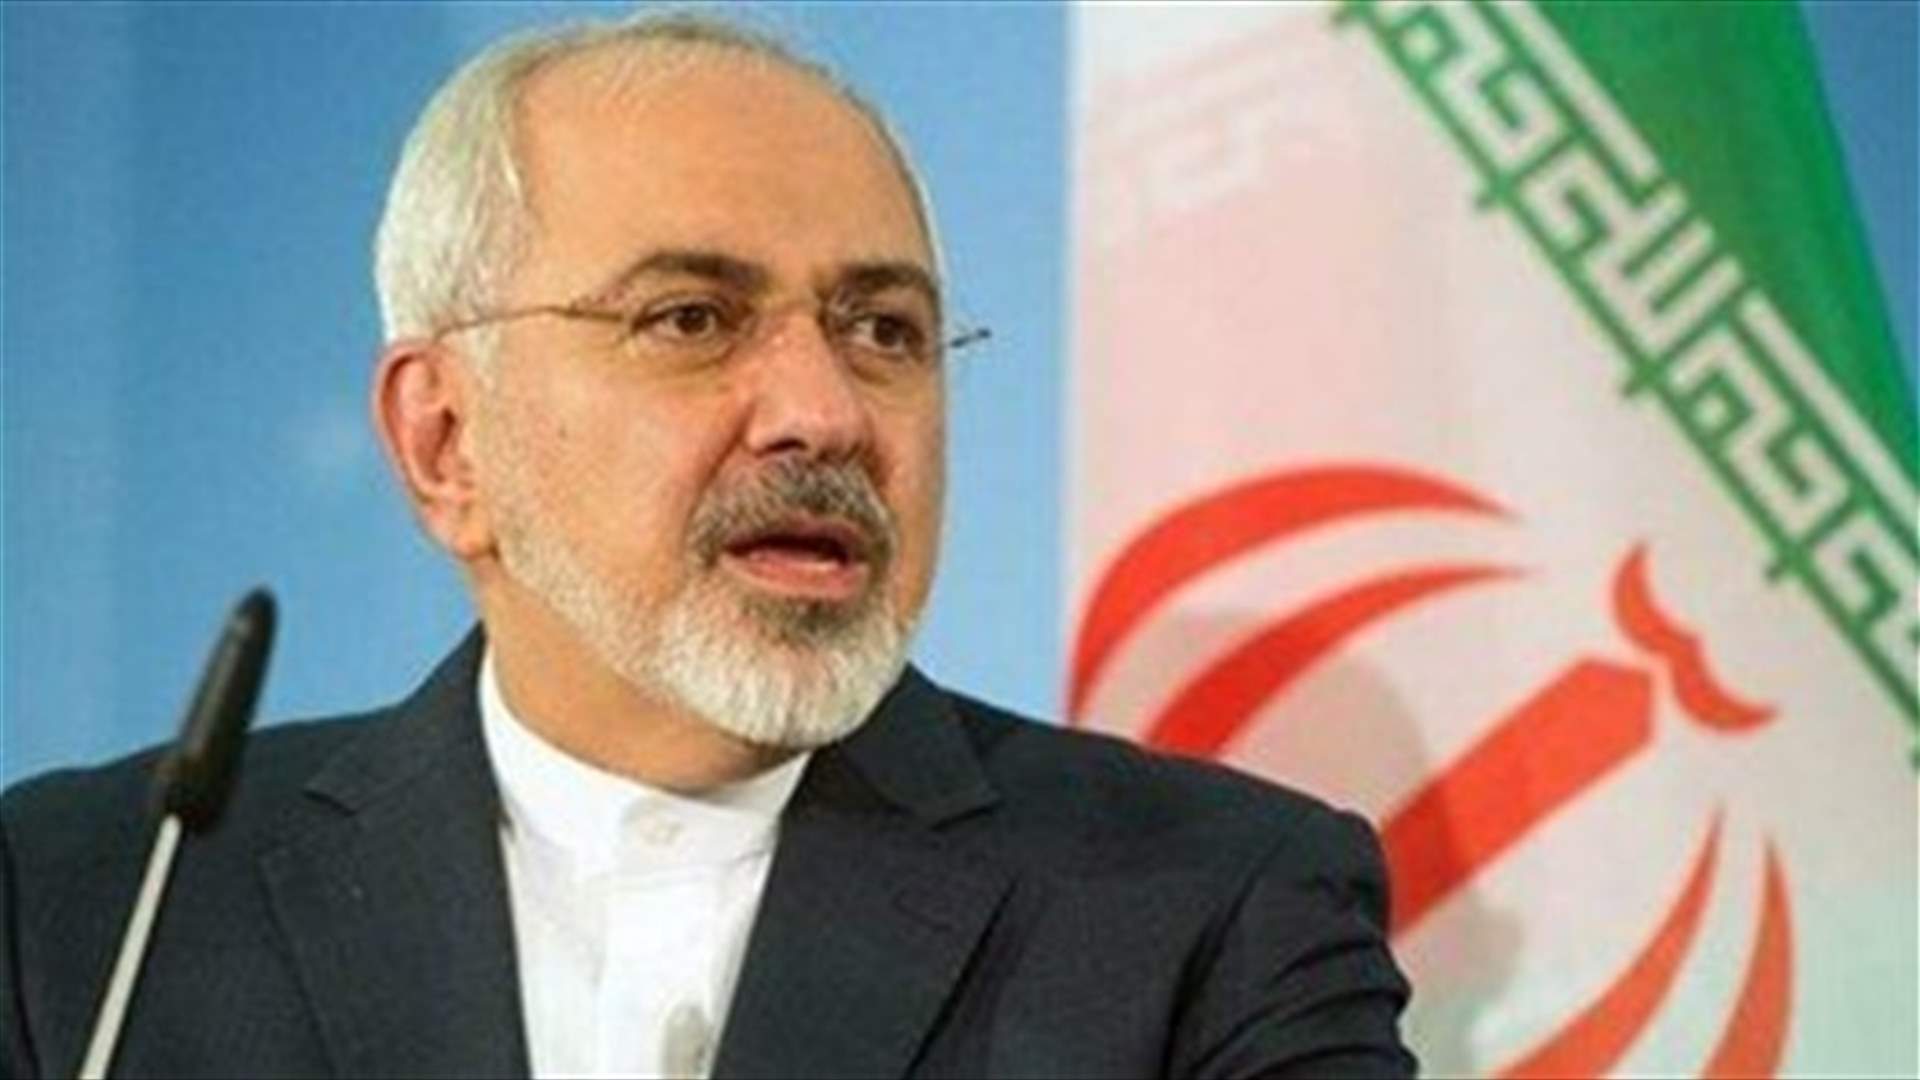 Iran welcomes dialogue with Gulf neighbors - foreign minister tweets